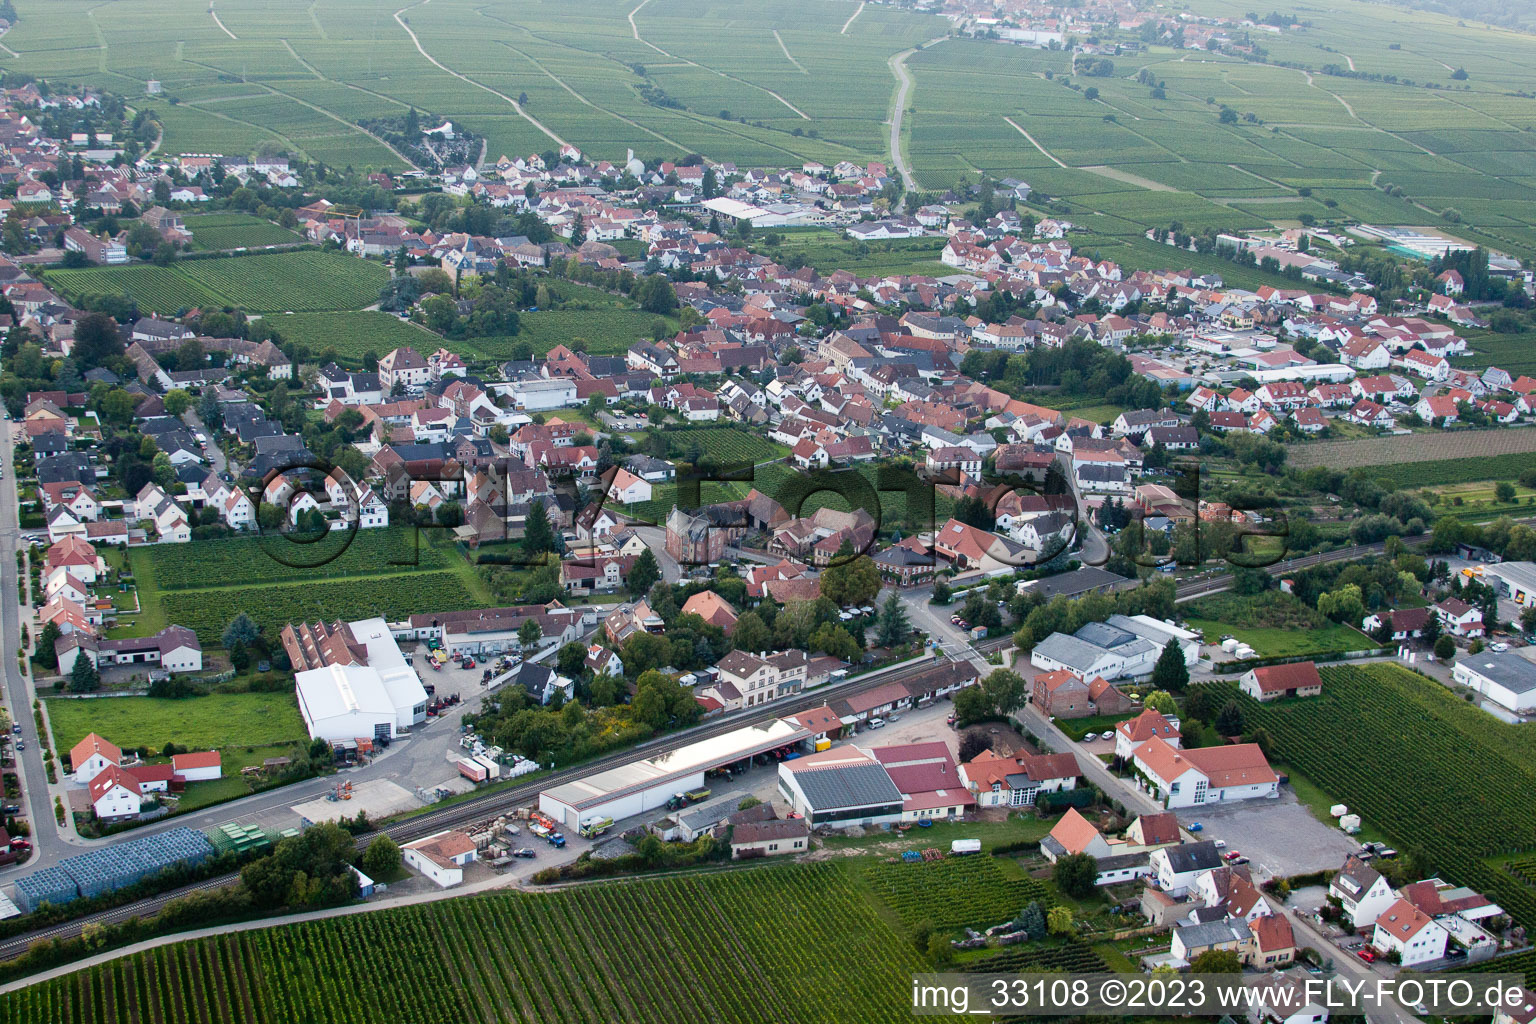 Drone image of Edesheim in the state Rhineland-Palatinate, Germany